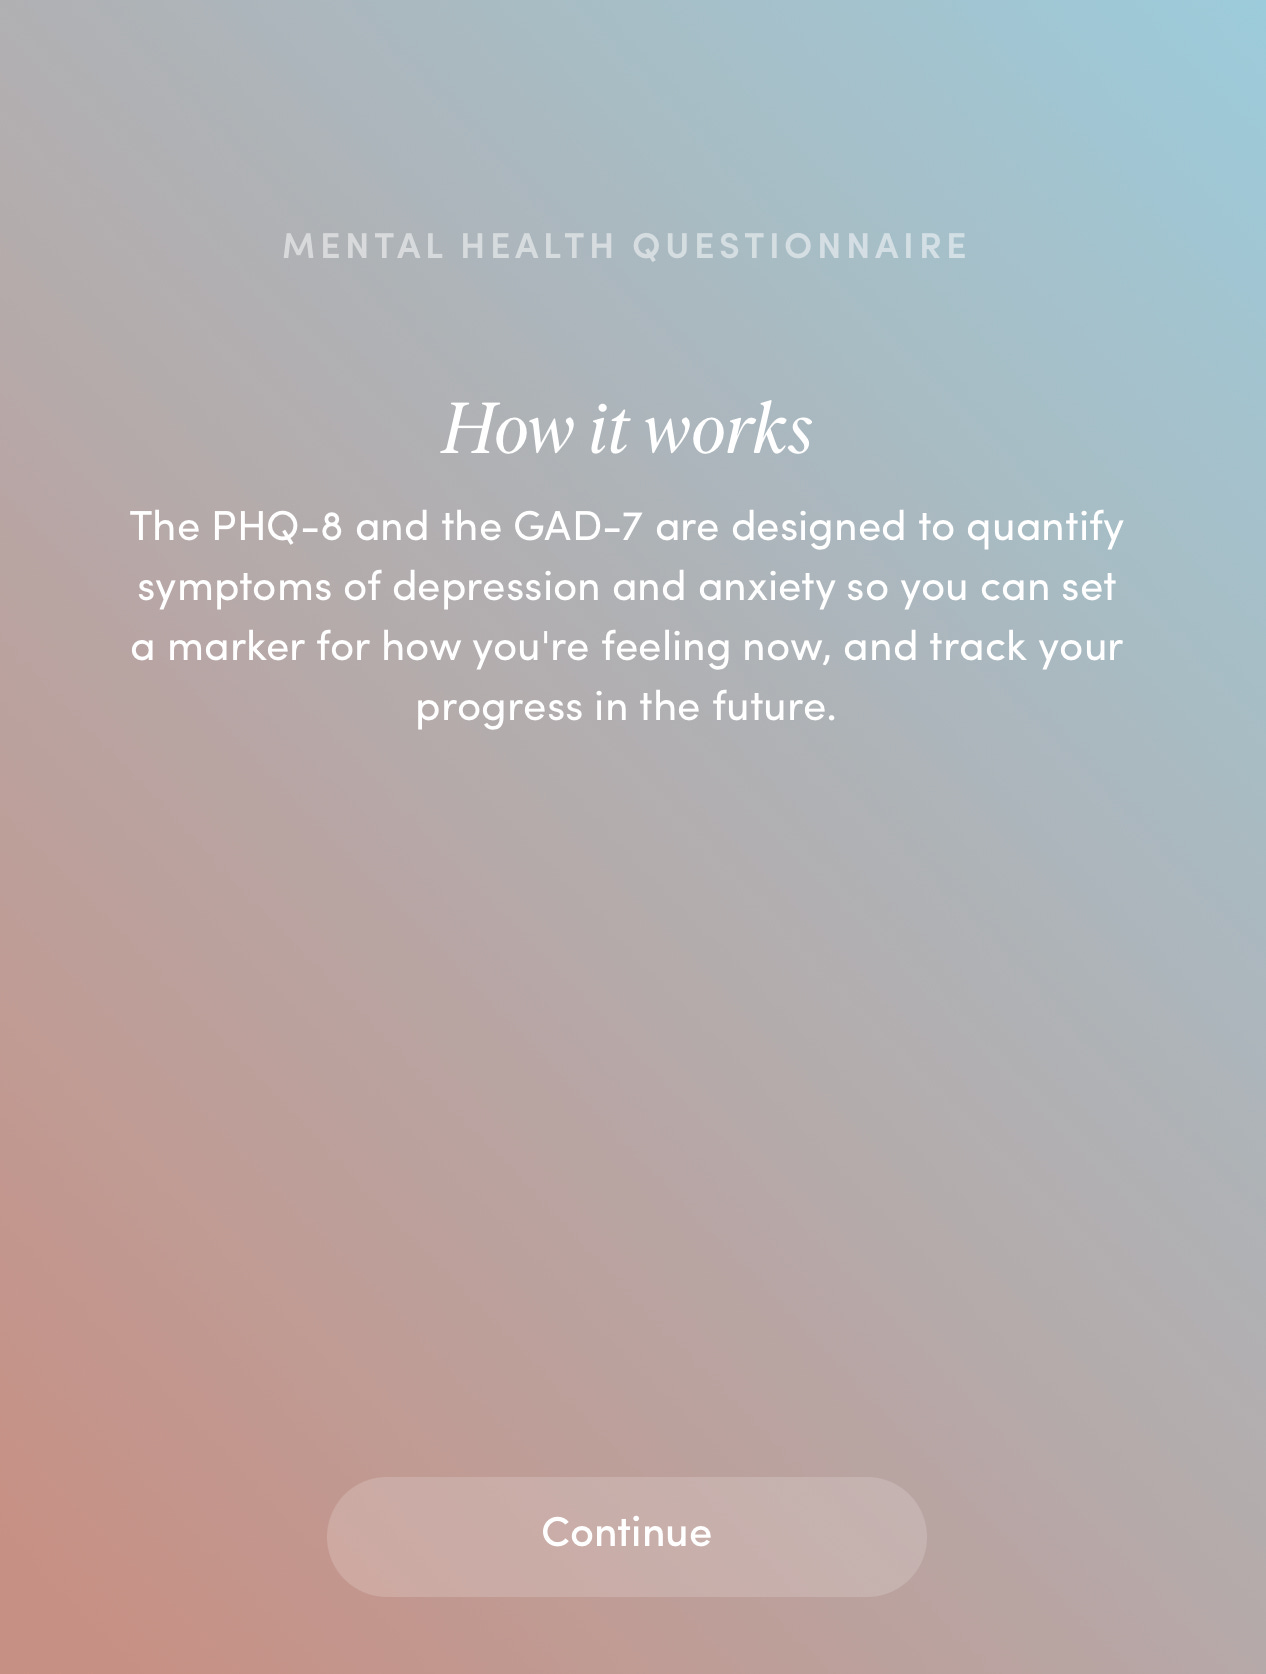 screenshot of page that says "The PHQ-8 and the GAD-7 are designed to quantify symptoms of depression and anxiety so you can set a marker for how you’re feeling now, and track your progress in the future."